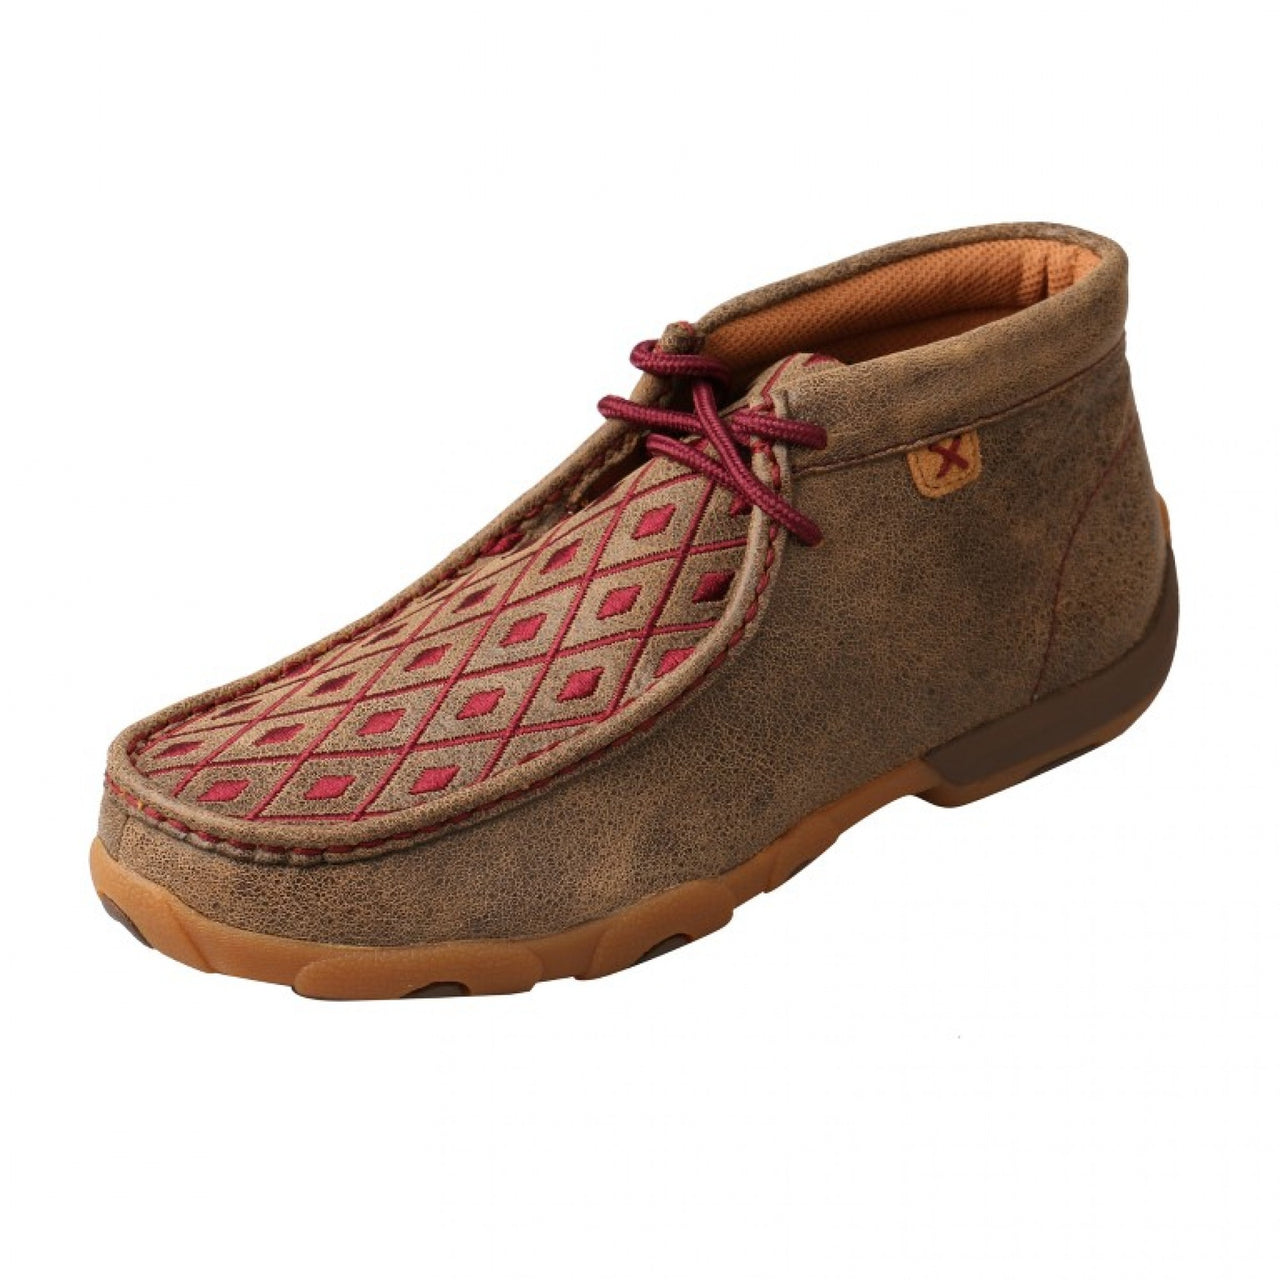 Twisted X Women's Driving Moc - High Ankle - Bomber/Mahogany